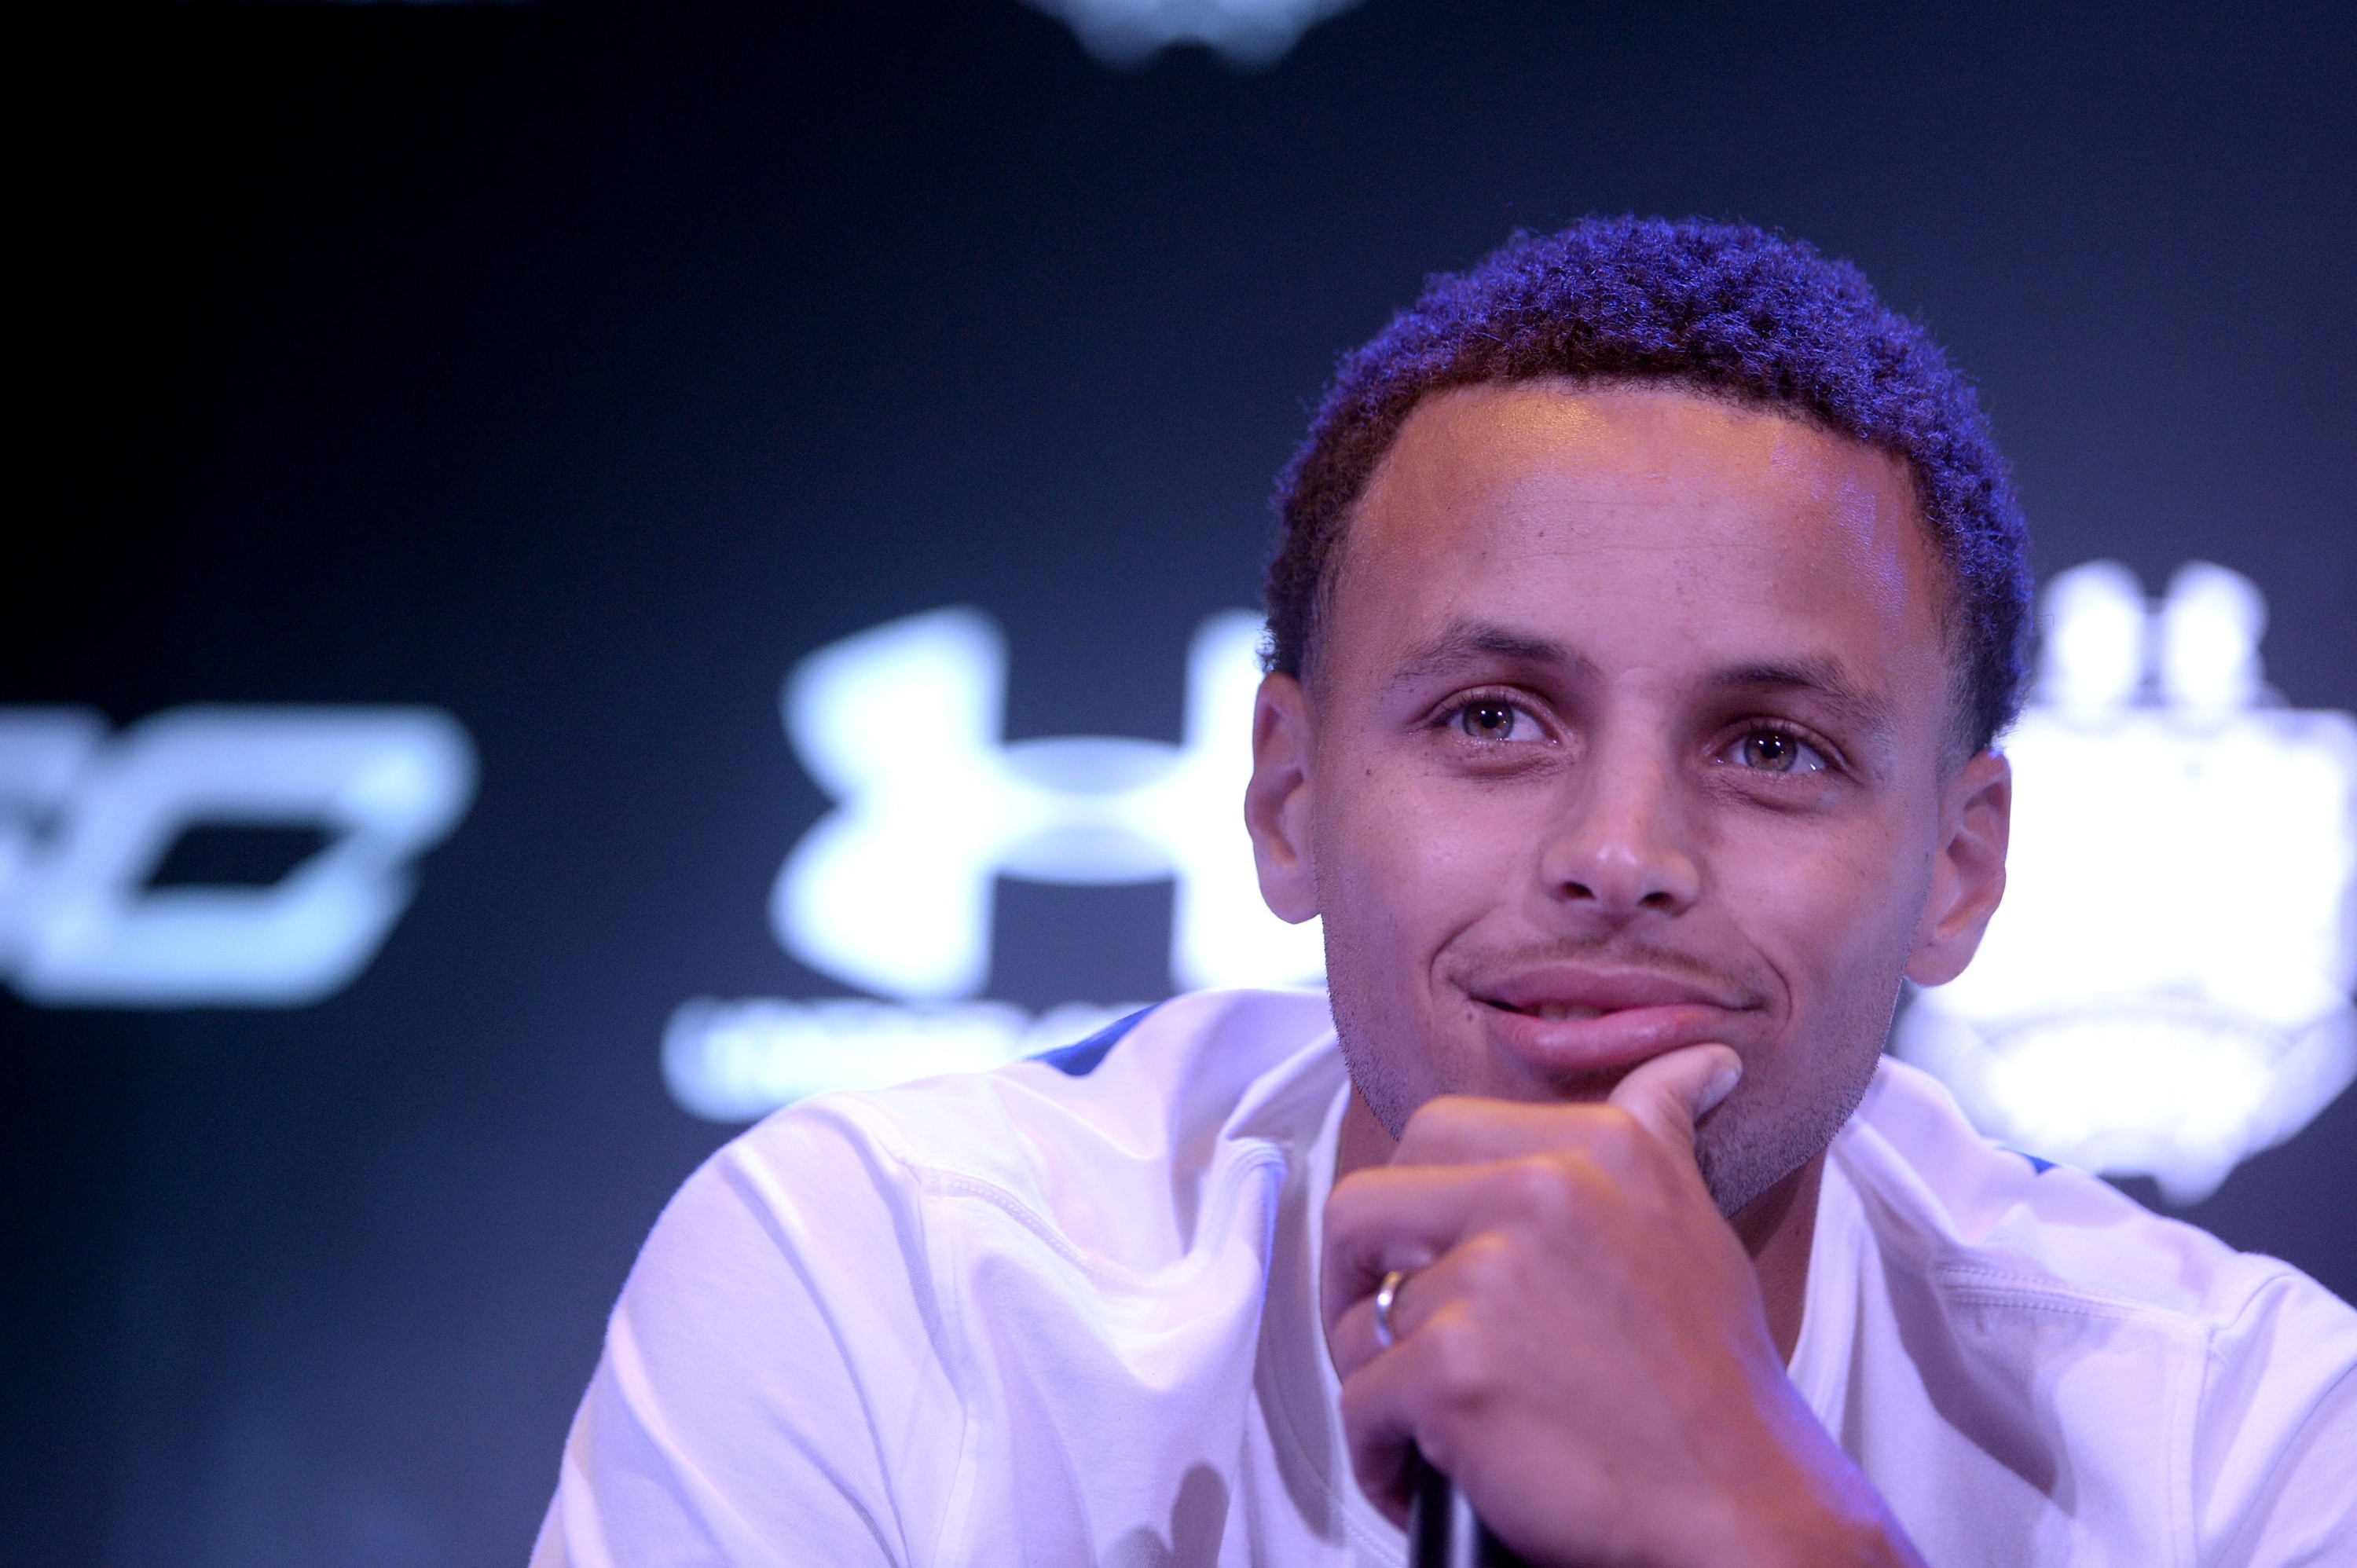 TrueHoop Presents: How Nike lost Stephen Curry to Under Armour - ESPN